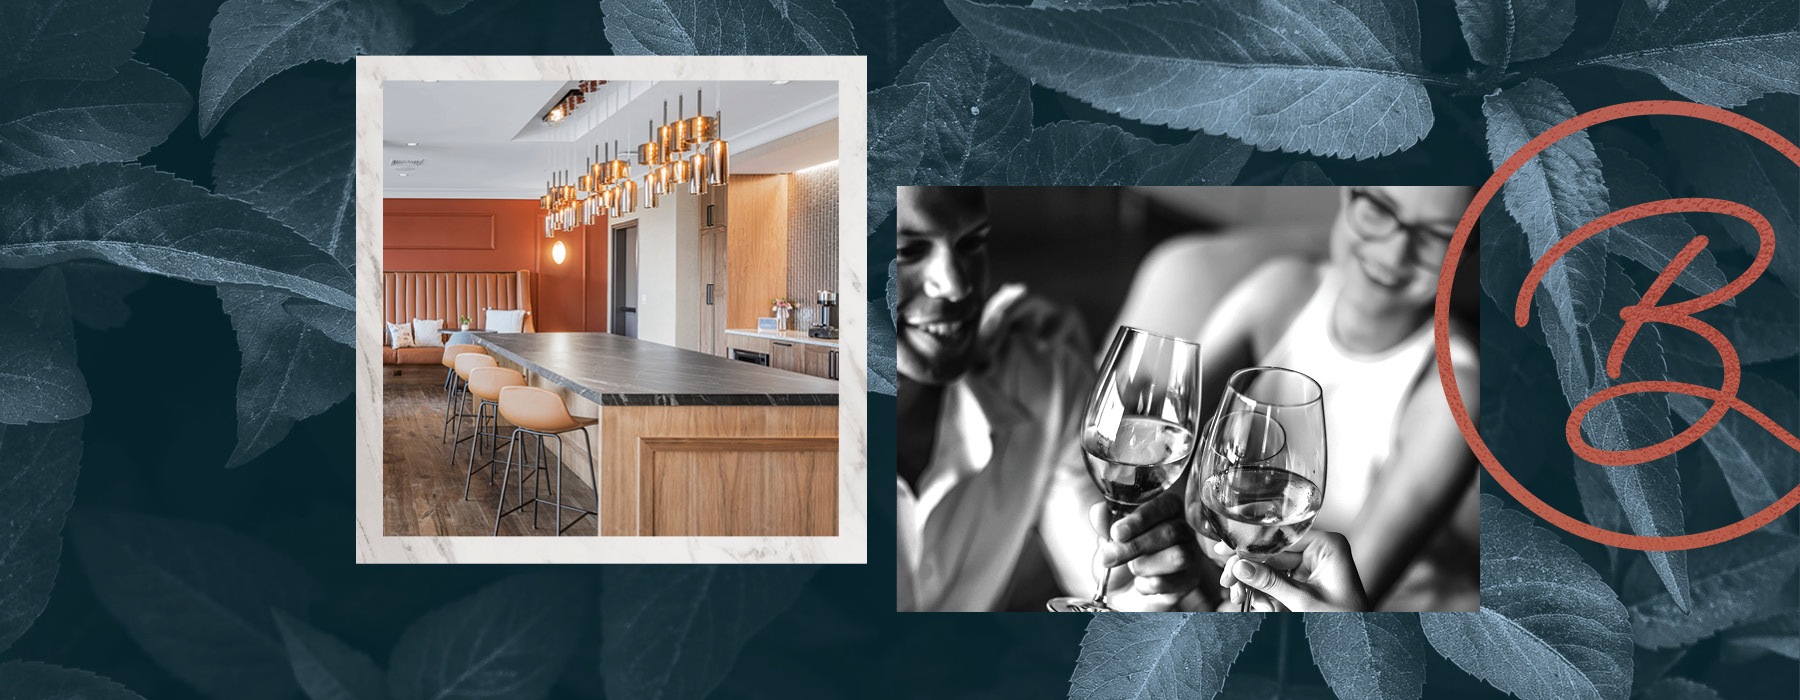 edited image of a modern kitchen and a lifestyle image of wine glasses